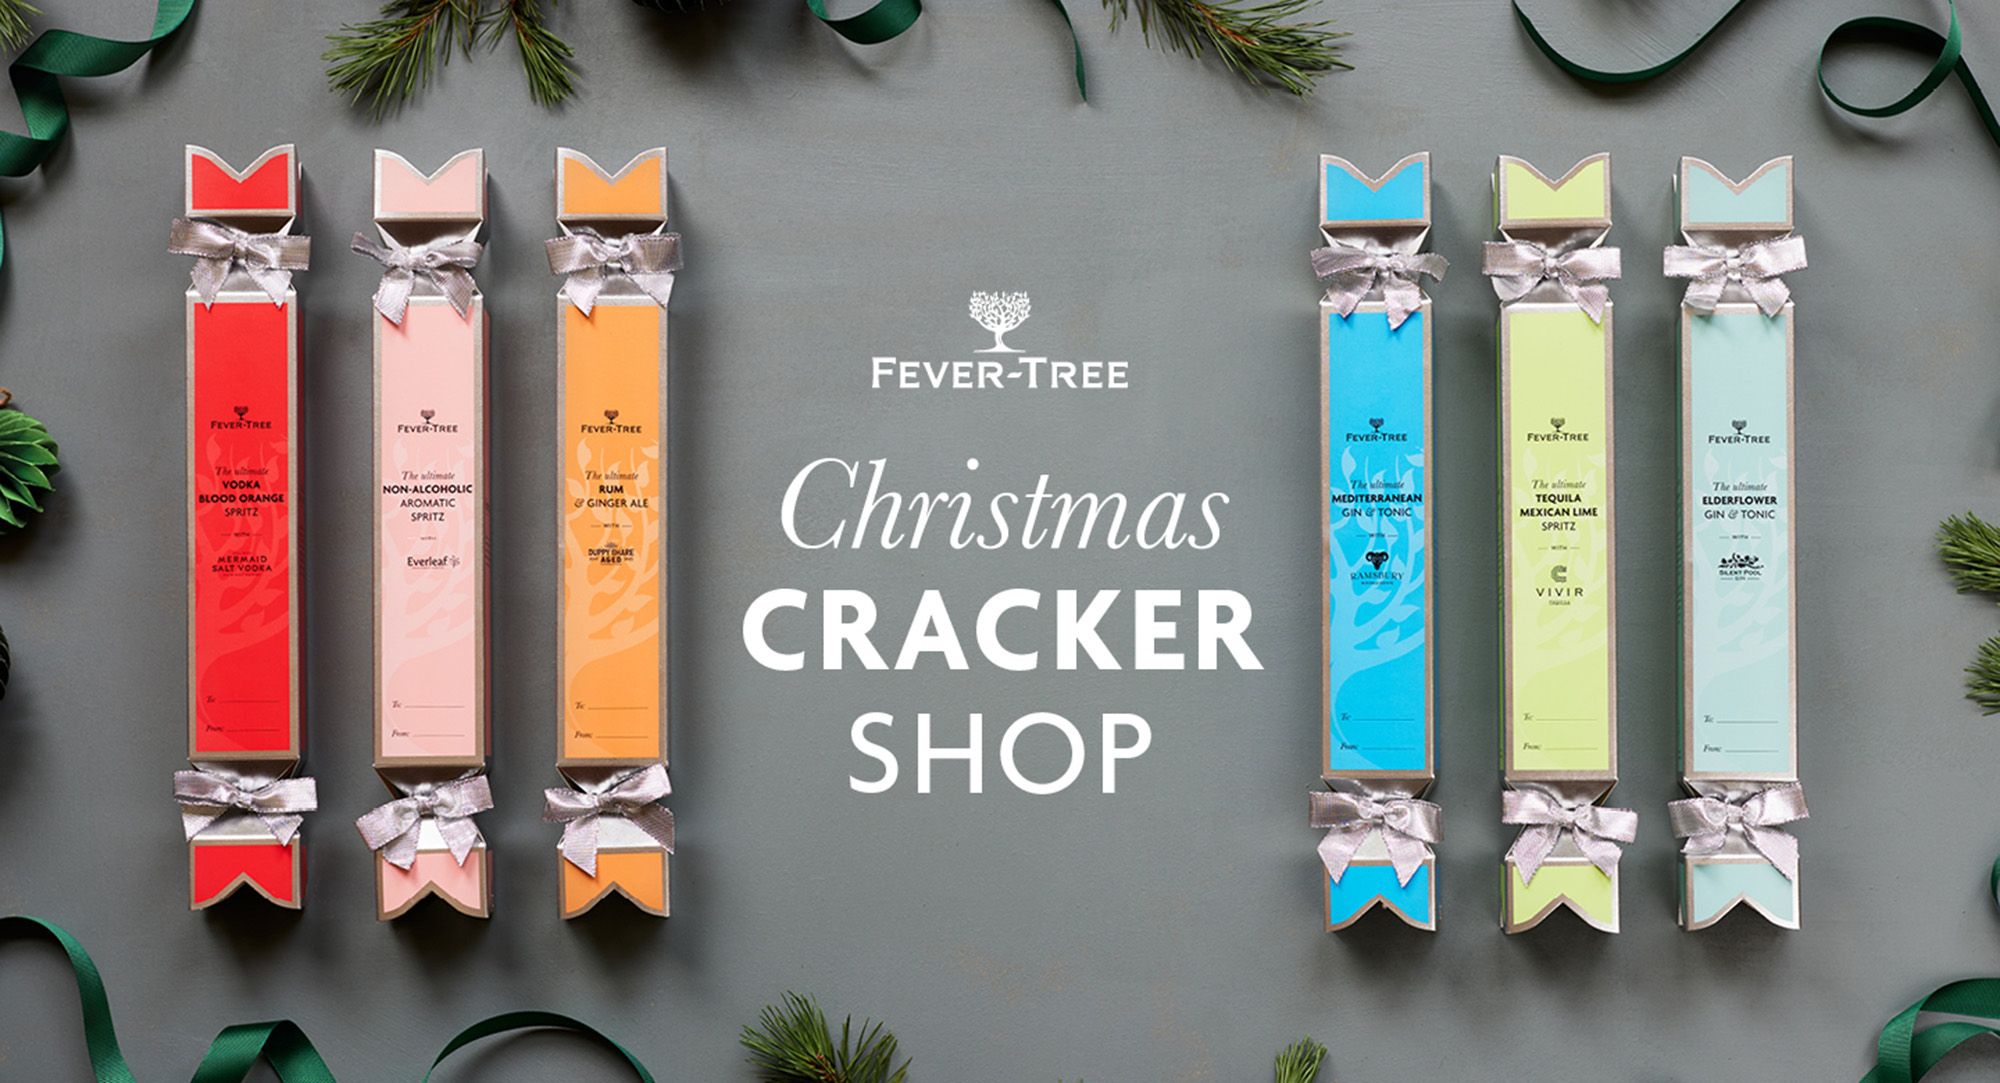 Image of a box of Fever Tree Crackers on a table with a Christmas Tree background